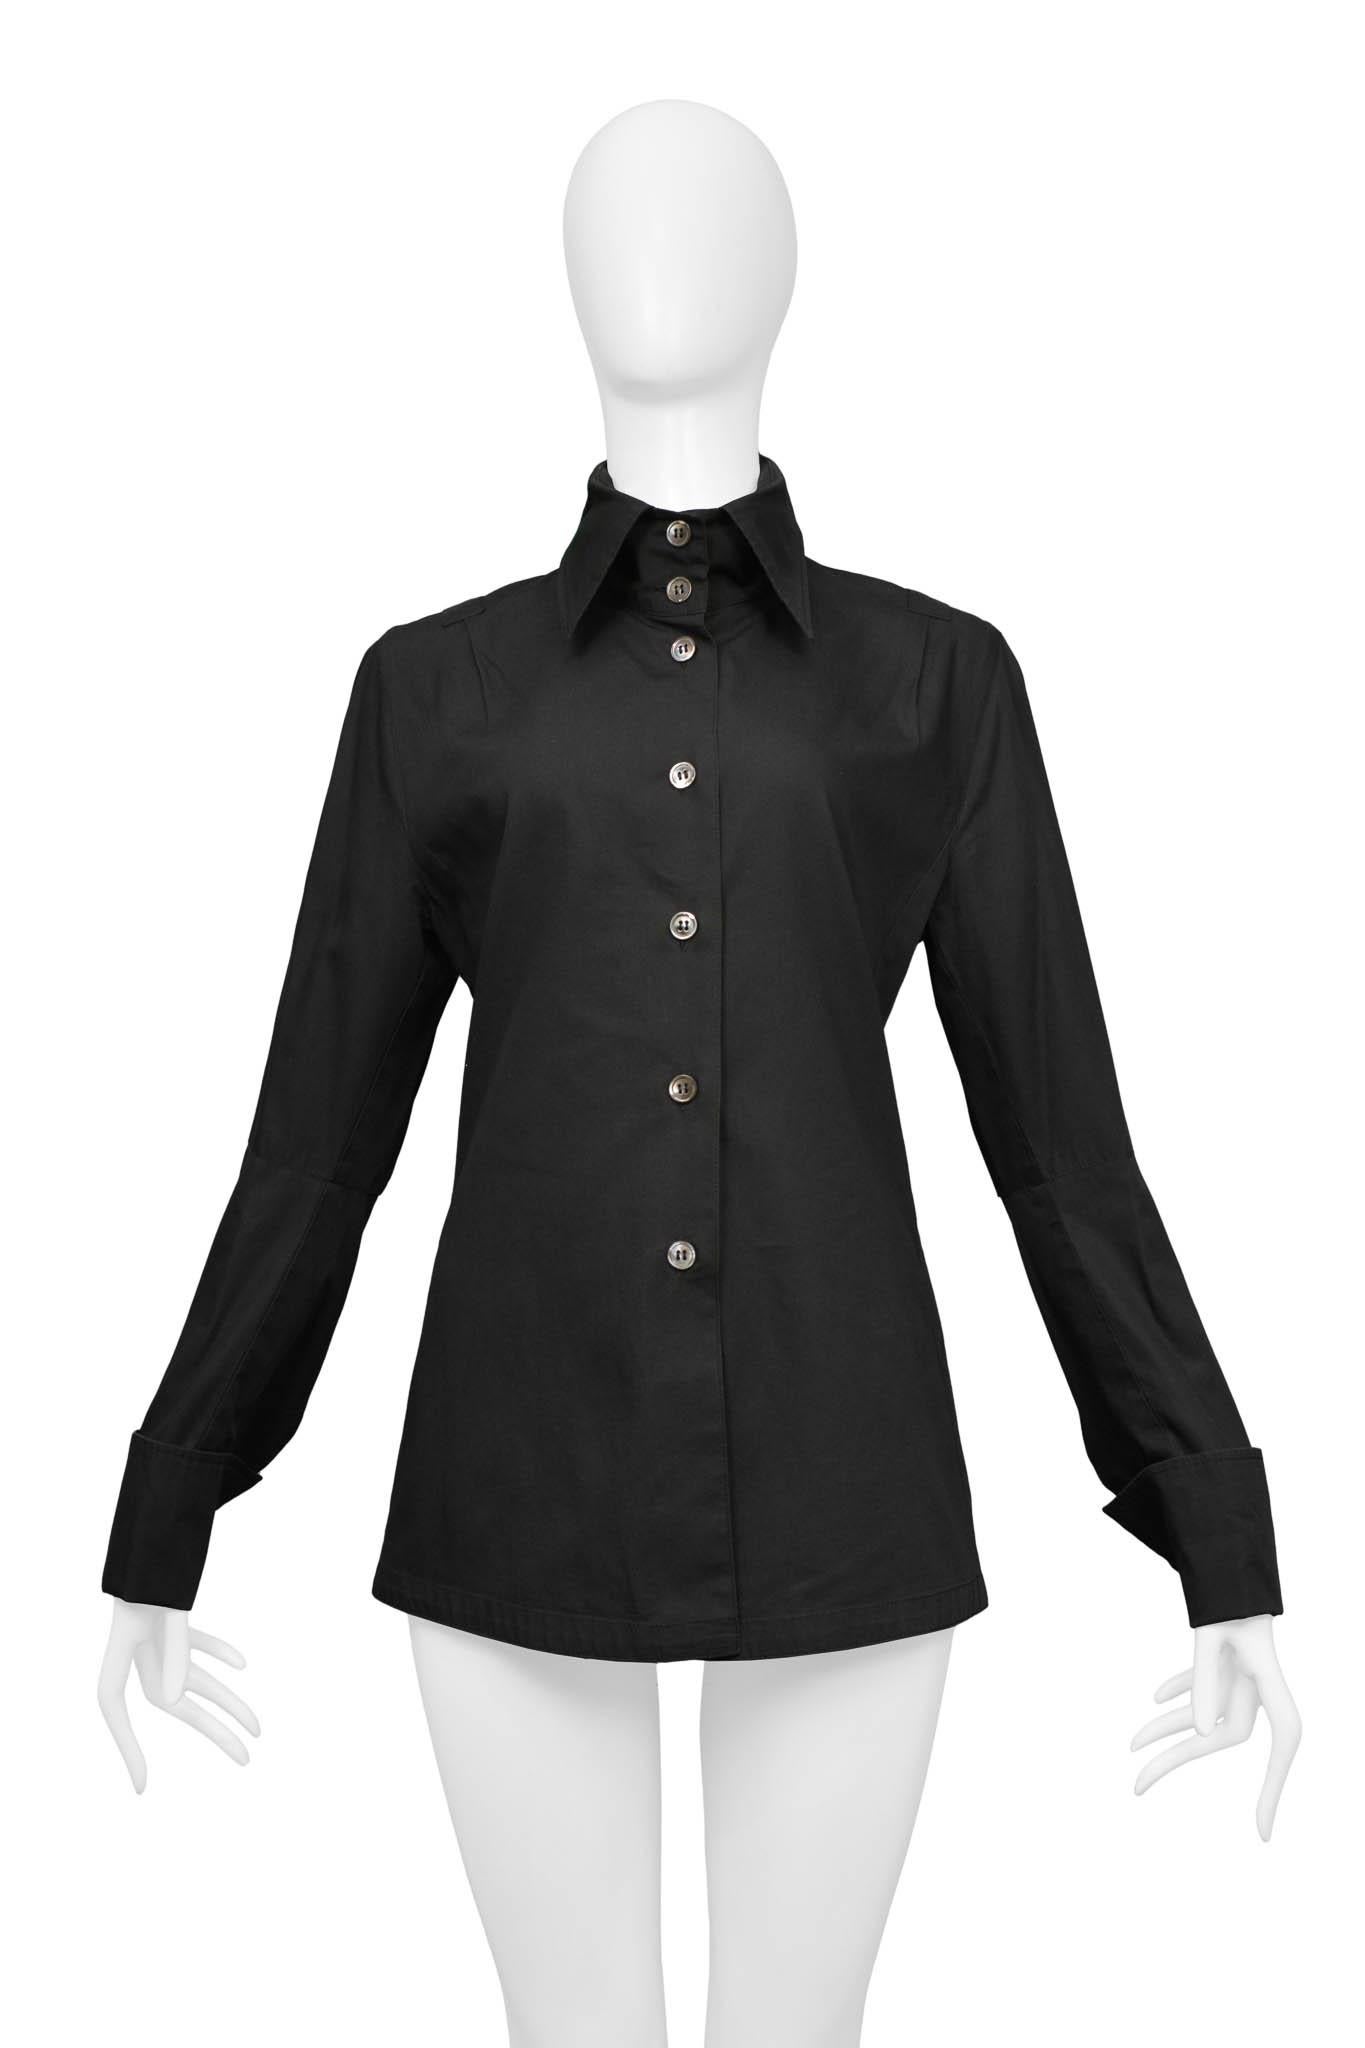 Resurrection Vintage is excited to offer a vintage Ann Demeulemeester black cotton shirt with a center front placket with grey buttons, utility tape trim, extra tall neck panel, and double buttons at the cuffs. 
Ann Demeulemeester
Size 36
Cotton